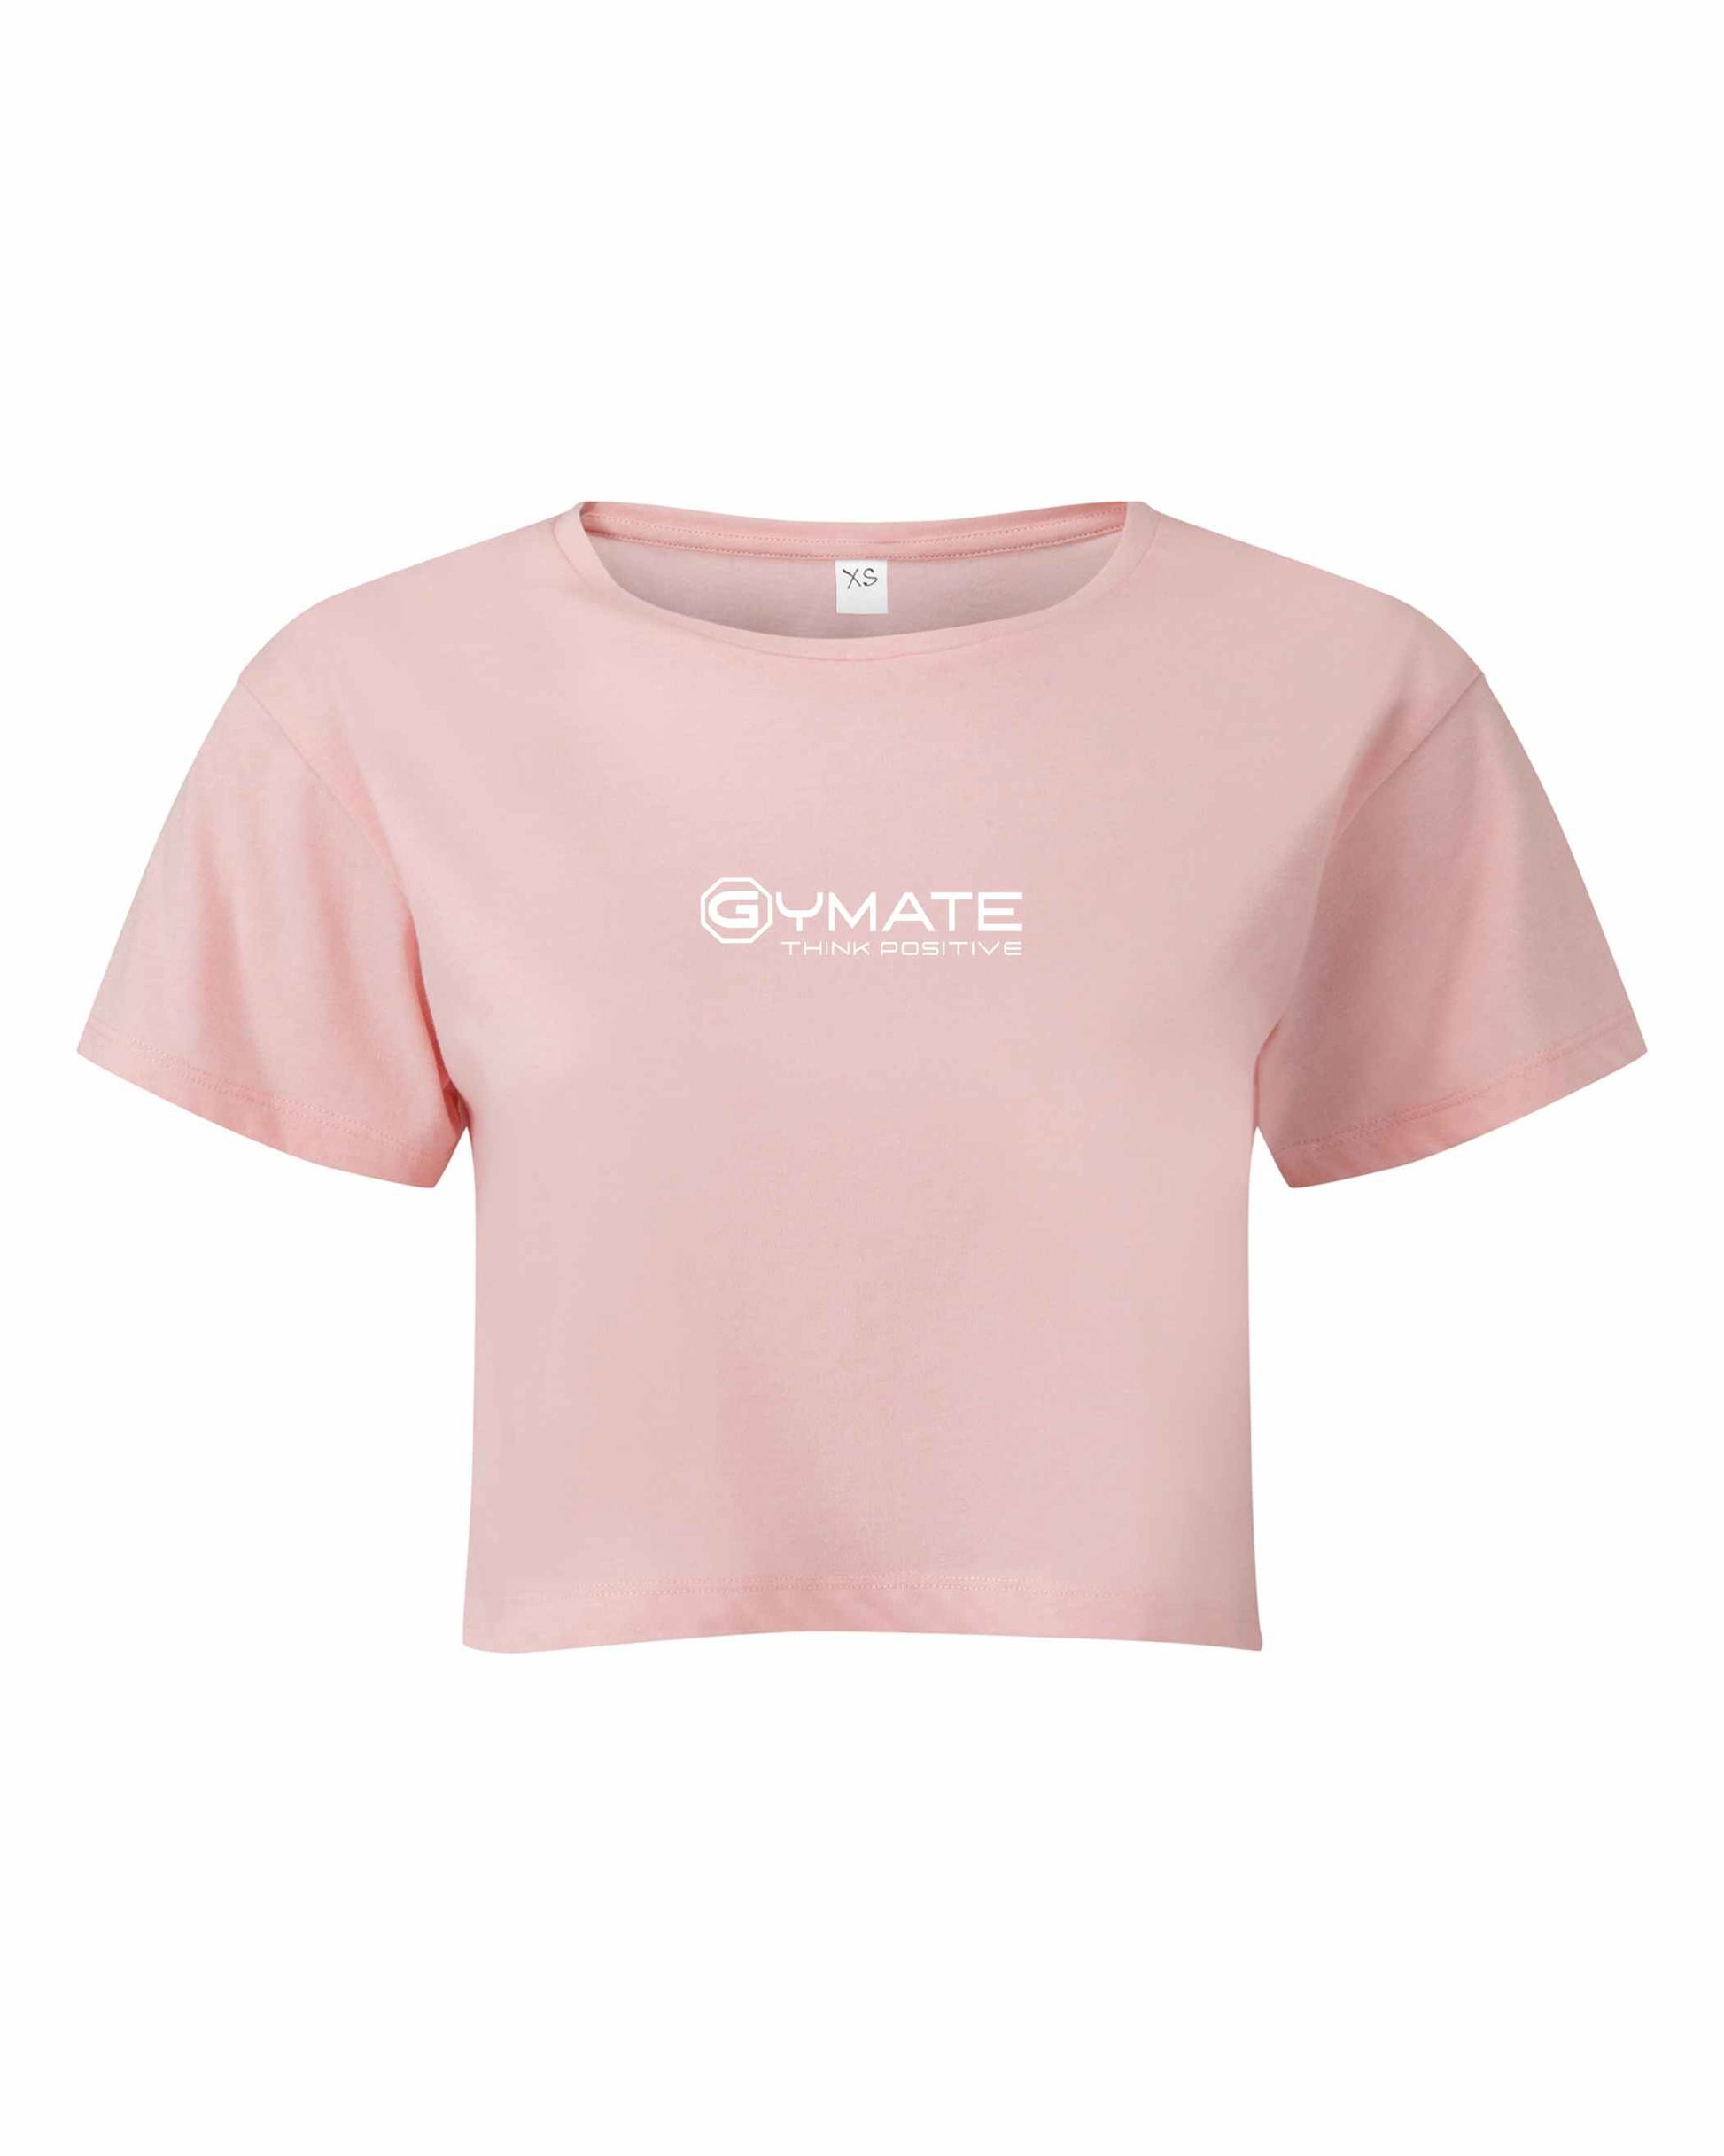 Womens Crop Tops Stylish Branded Activewear pink